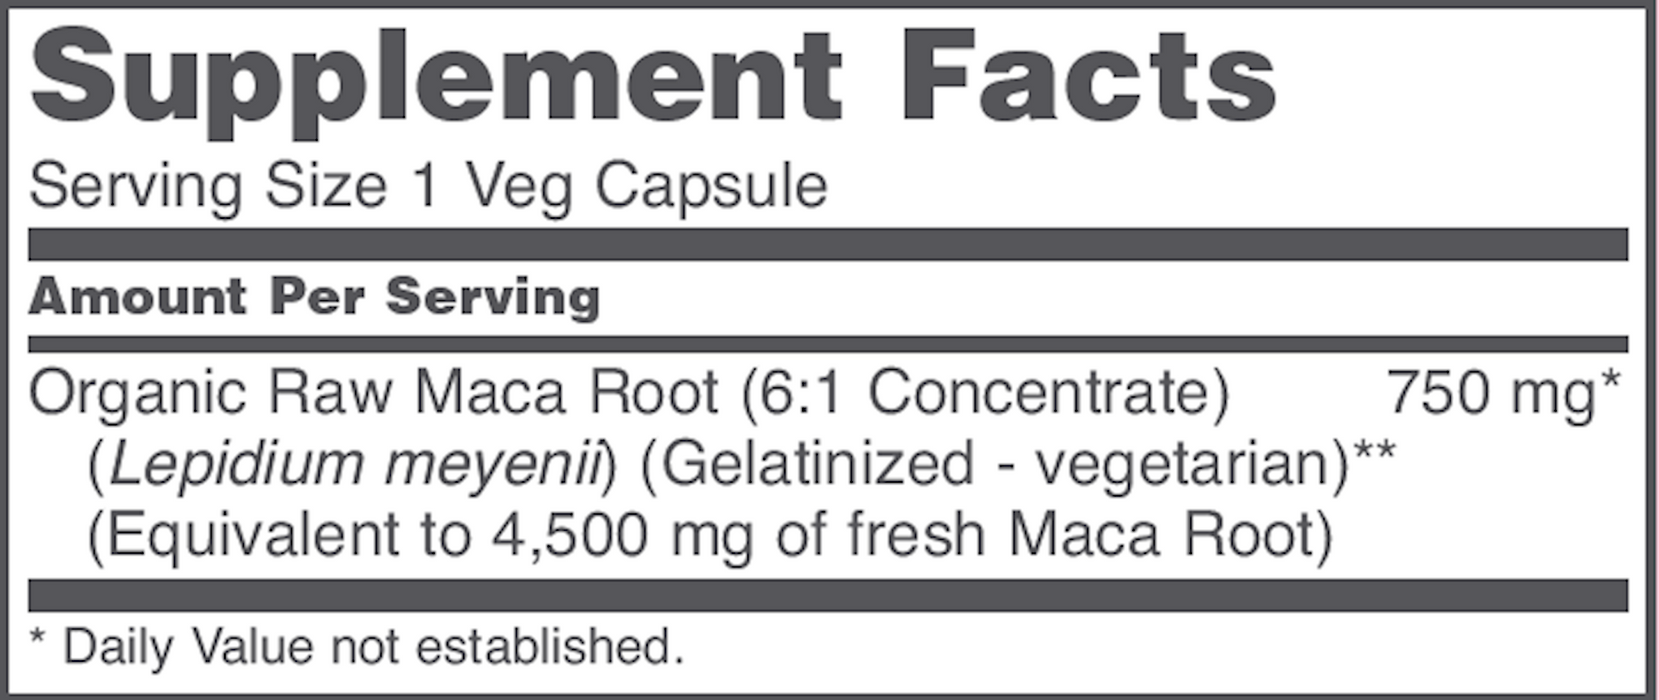 Raw Maca (750 mg) (90 Capsules)-Vitamins & Supplements-Protocol For Life Balance-Pine Street Clinic